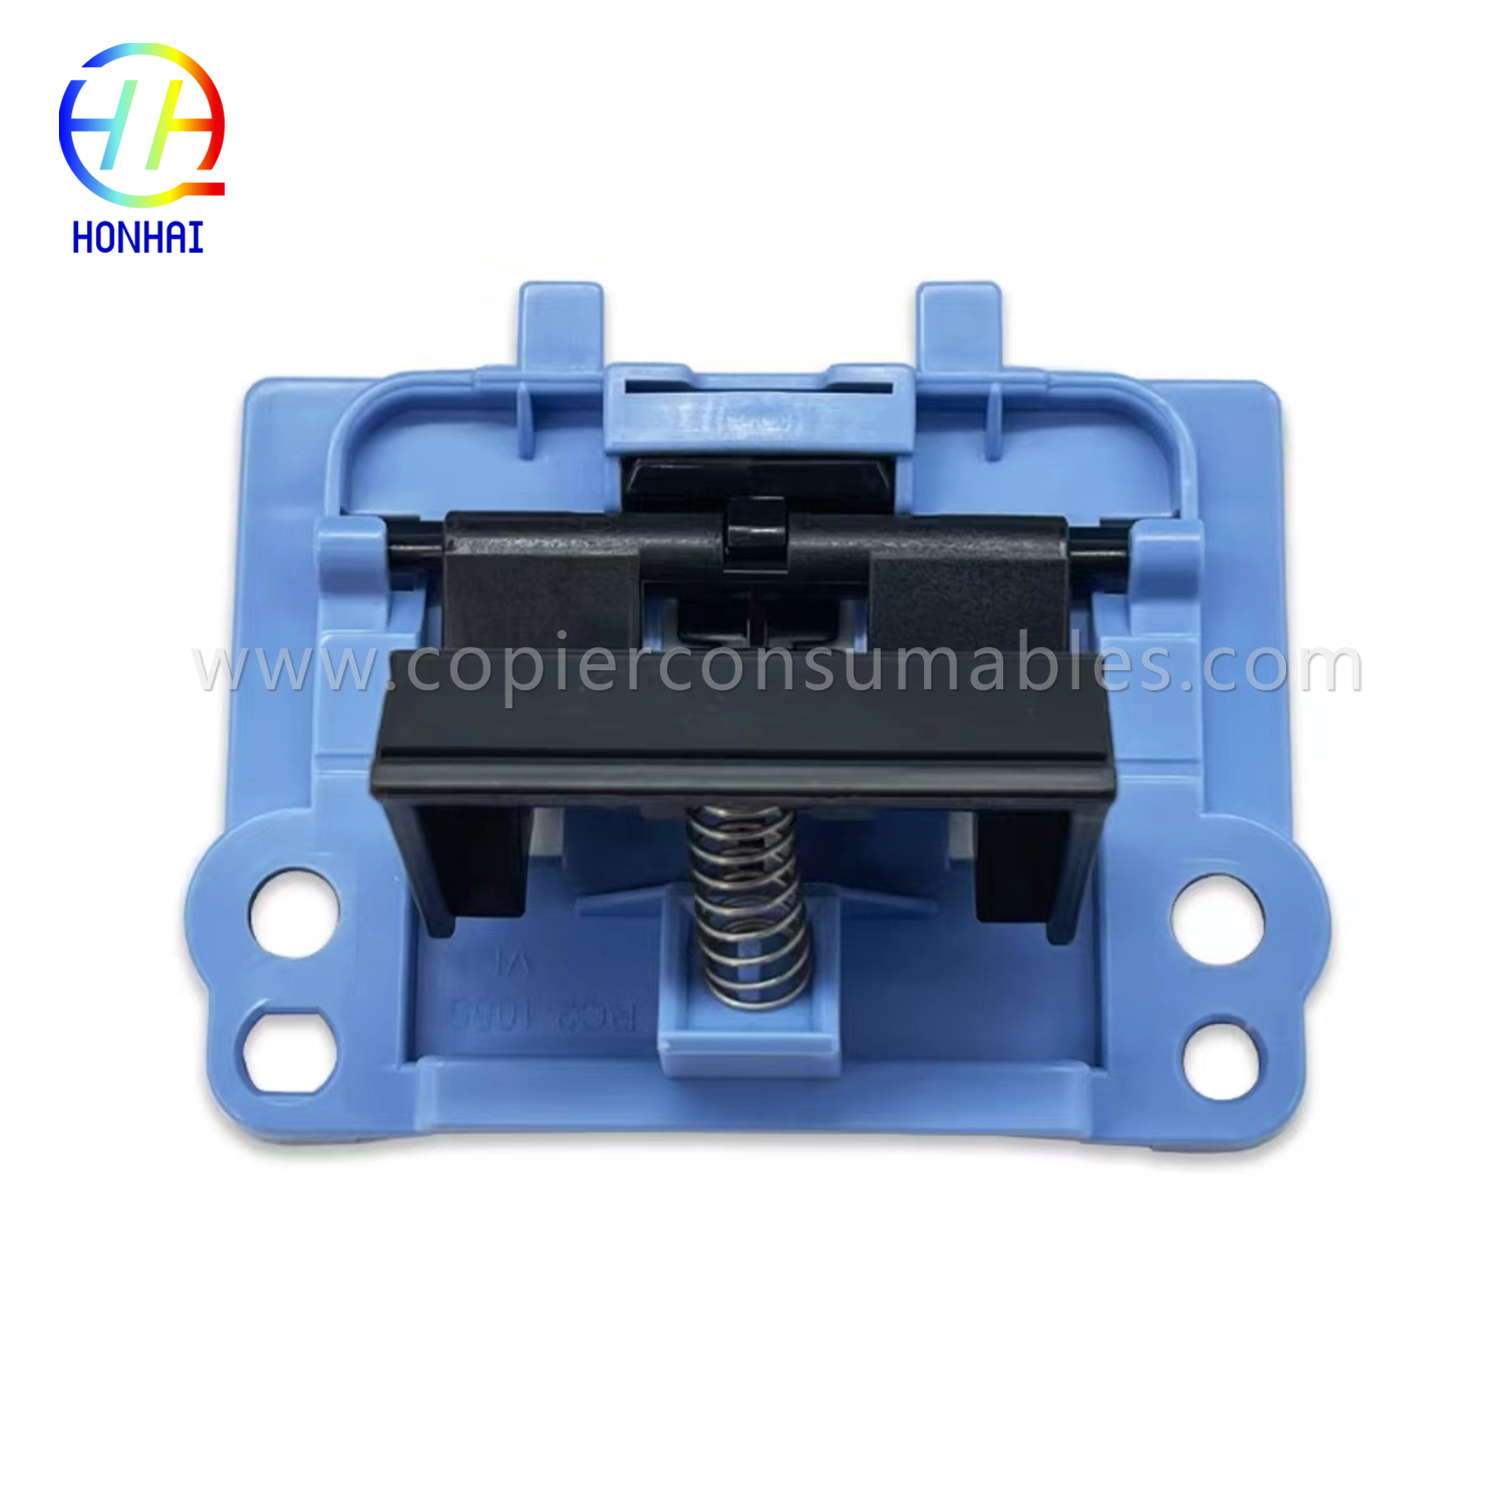 Separation Pad for HP Laserjet M1522n M1522NF P1505 P1505n PRO-M1536dnf P1606dn RM1-4207-000 RM1-4227-000